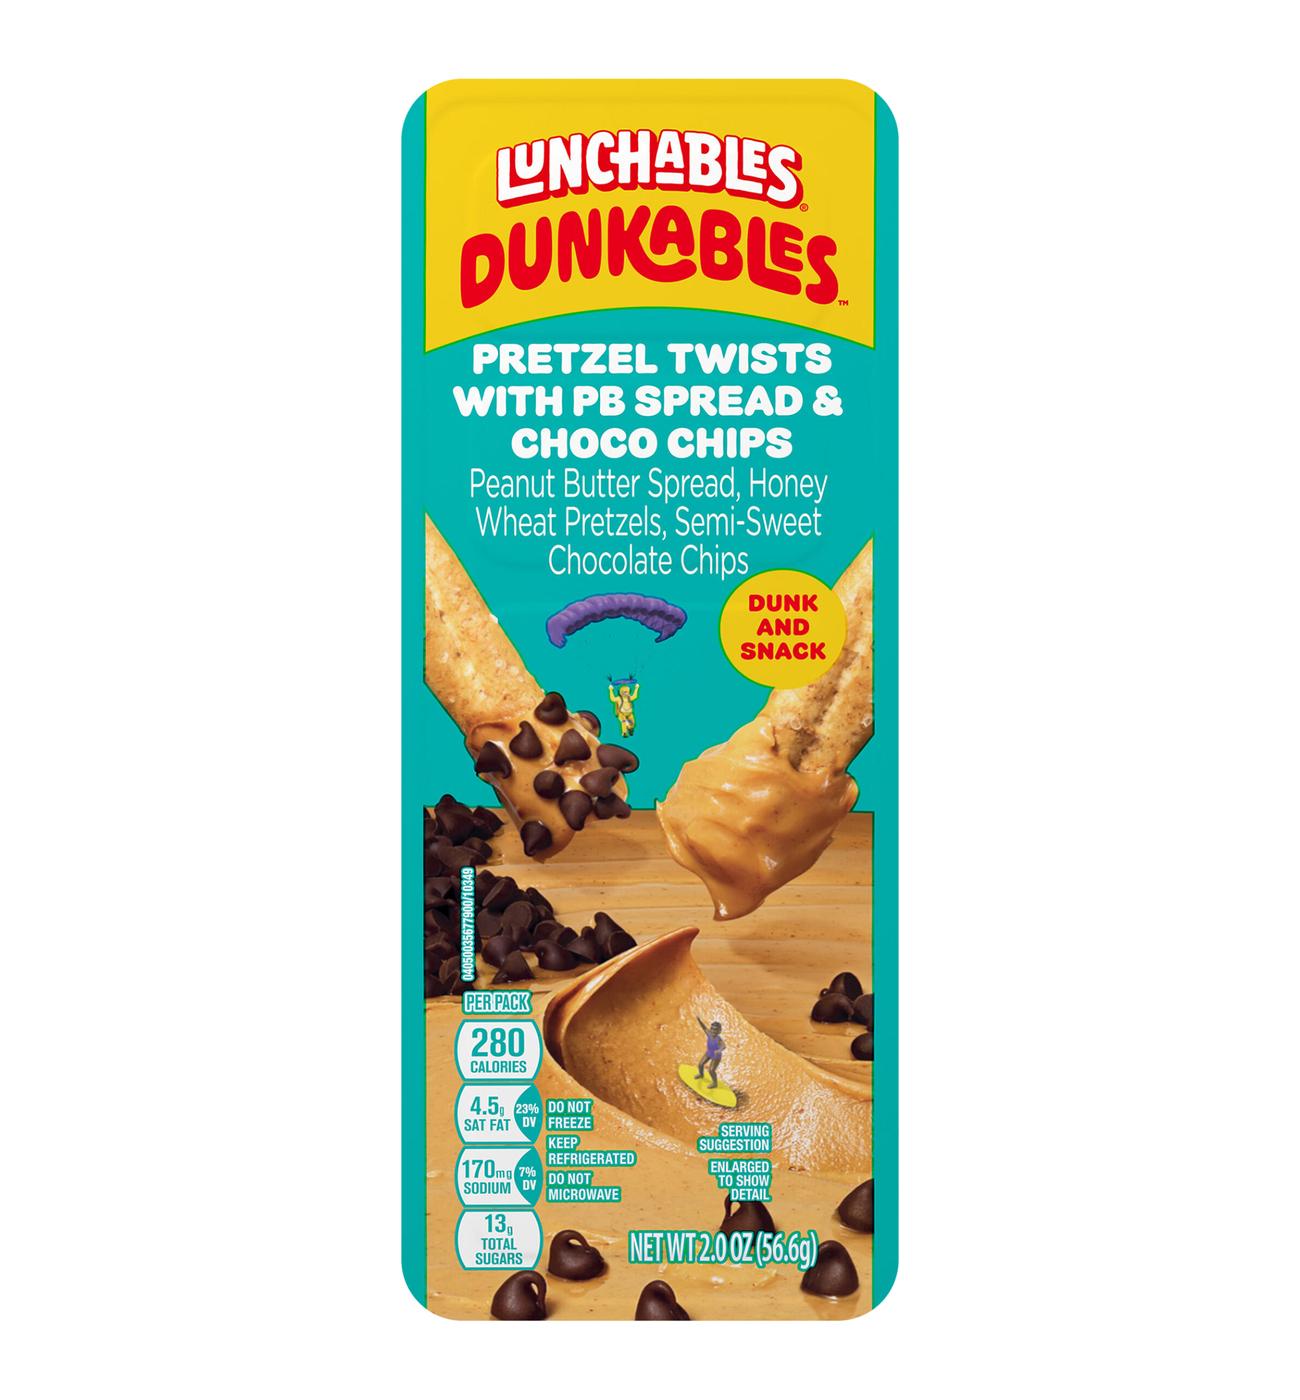 Lunchables Dunkables Snack Kit Tray - Pretzel Twists with PB Spread & Choco Chips; image 1 of 8